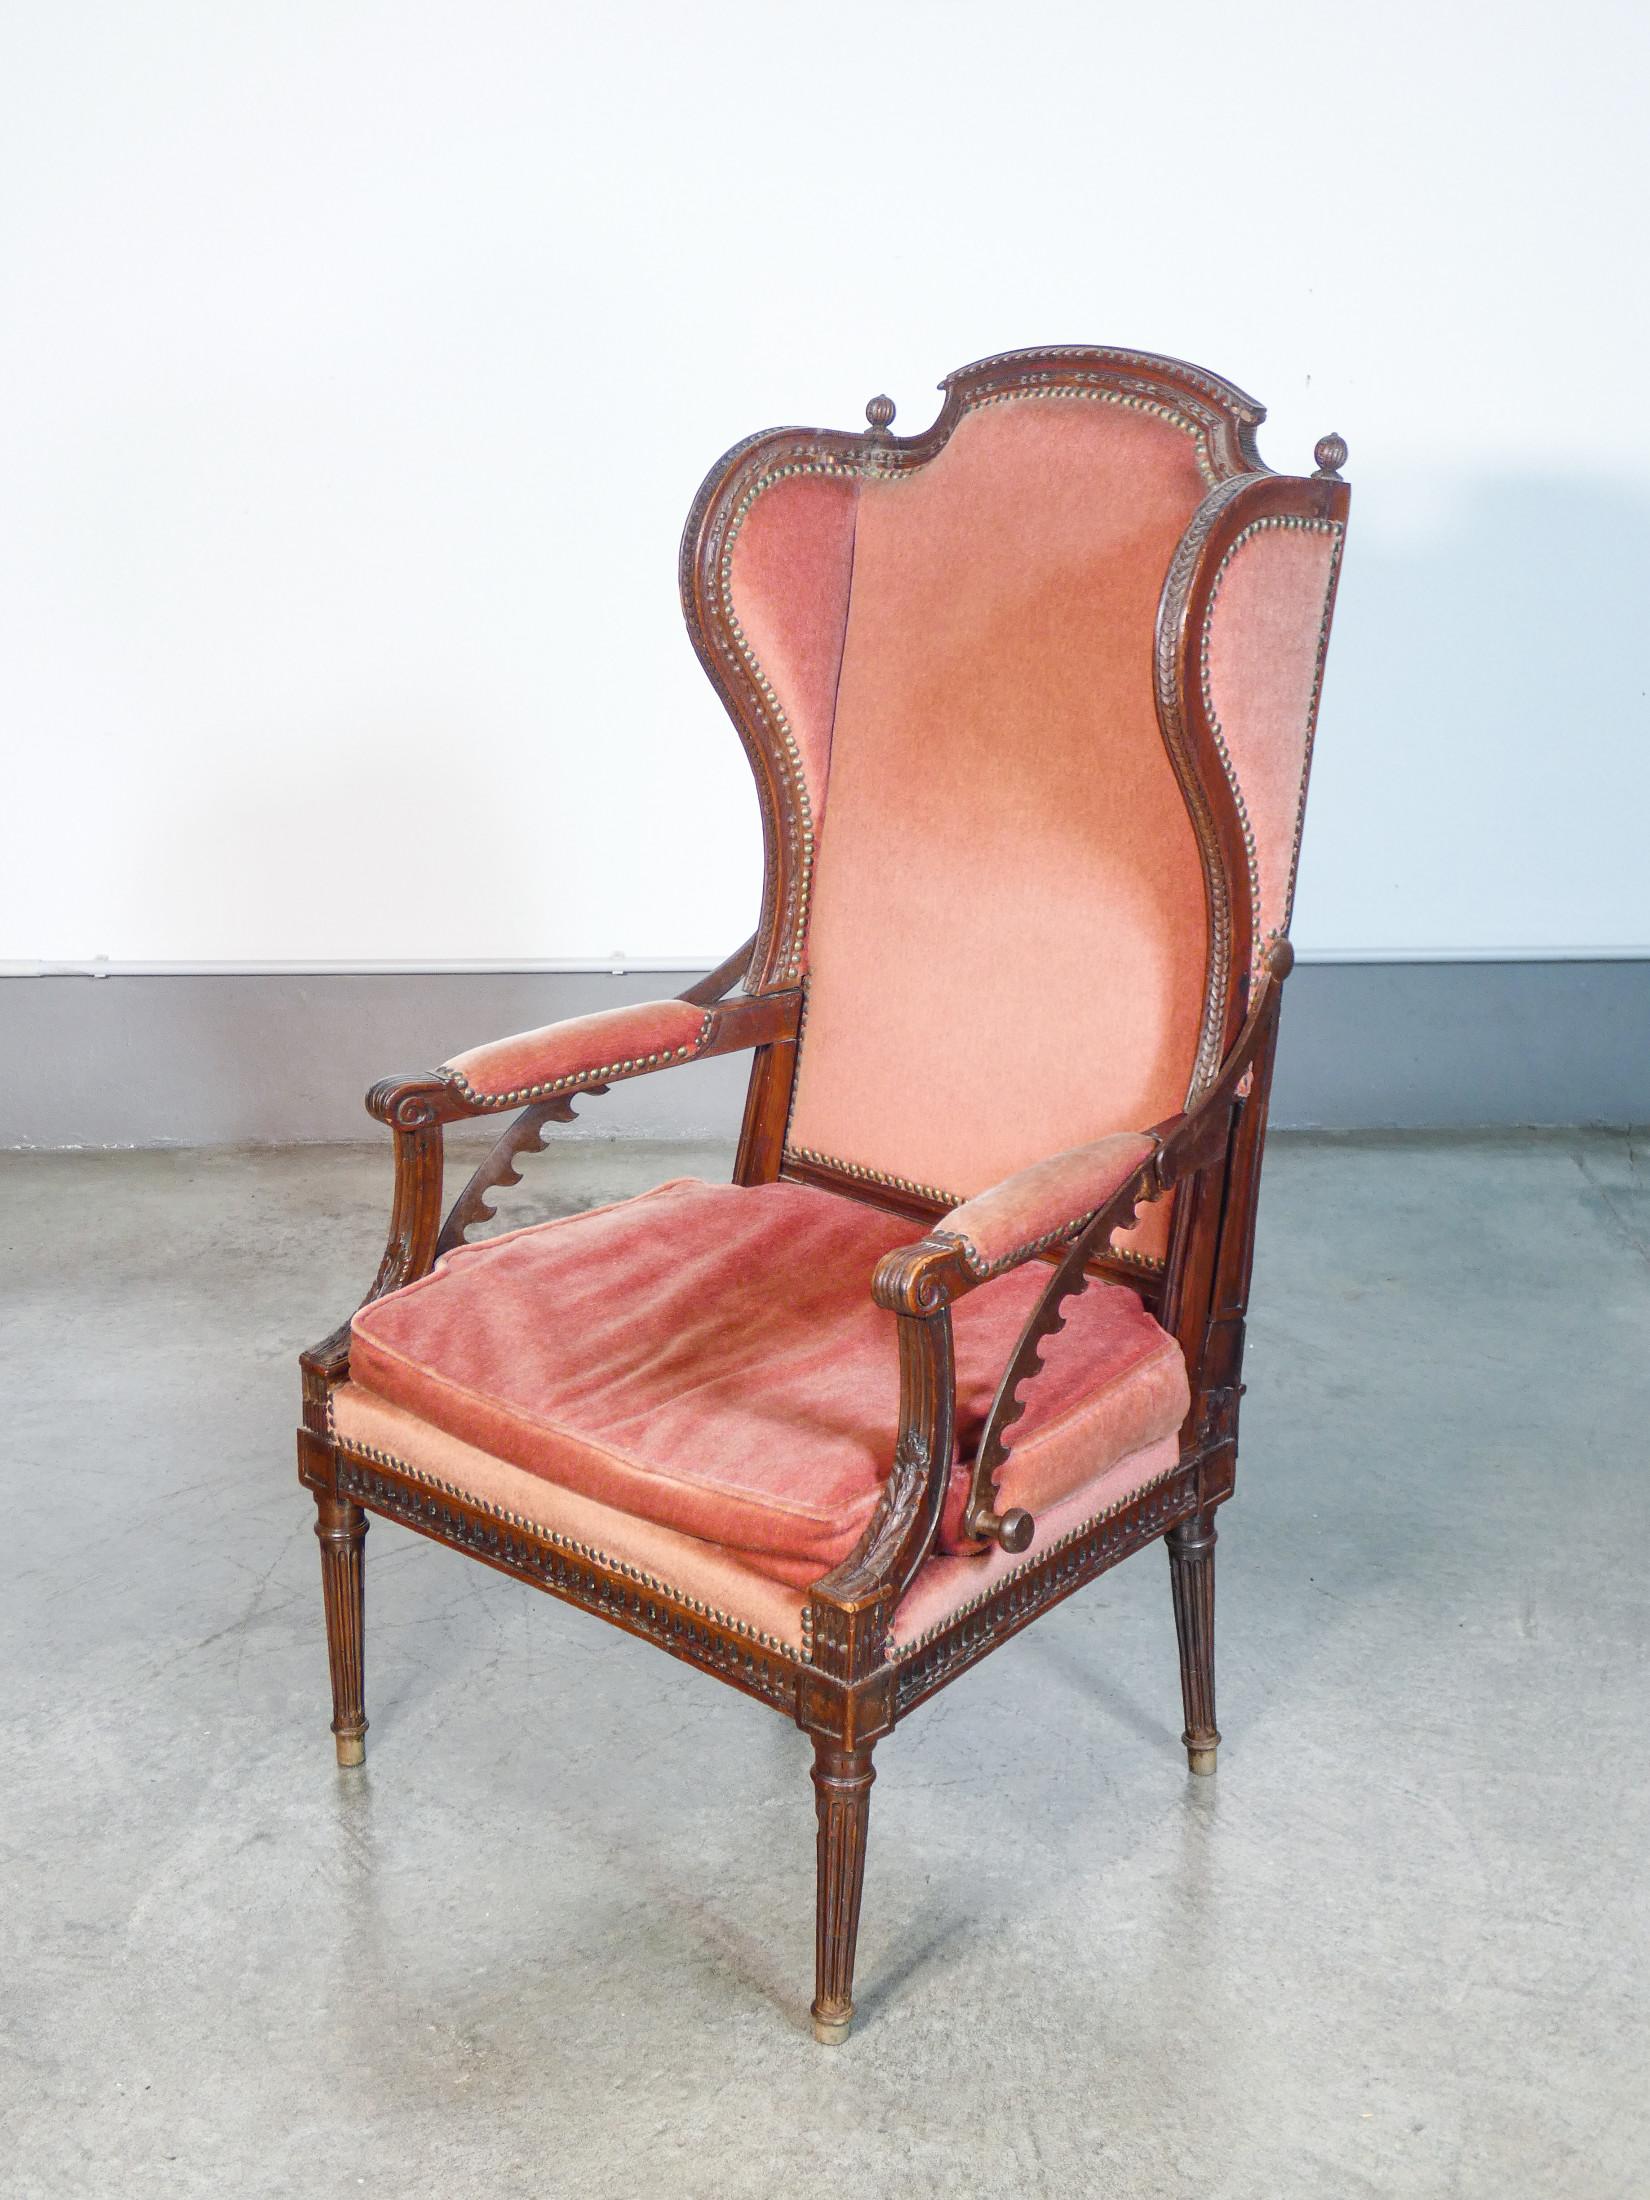 Rare recliner chair
directory style,
in walnut wood.

PERIOD
Late eighteenth century,
Early 19th century

MATERIALS
Solid walnut wood, upholstery and padding

DIMENSIONS
The potrona reclines to different levels. We report the dimensions of the fully